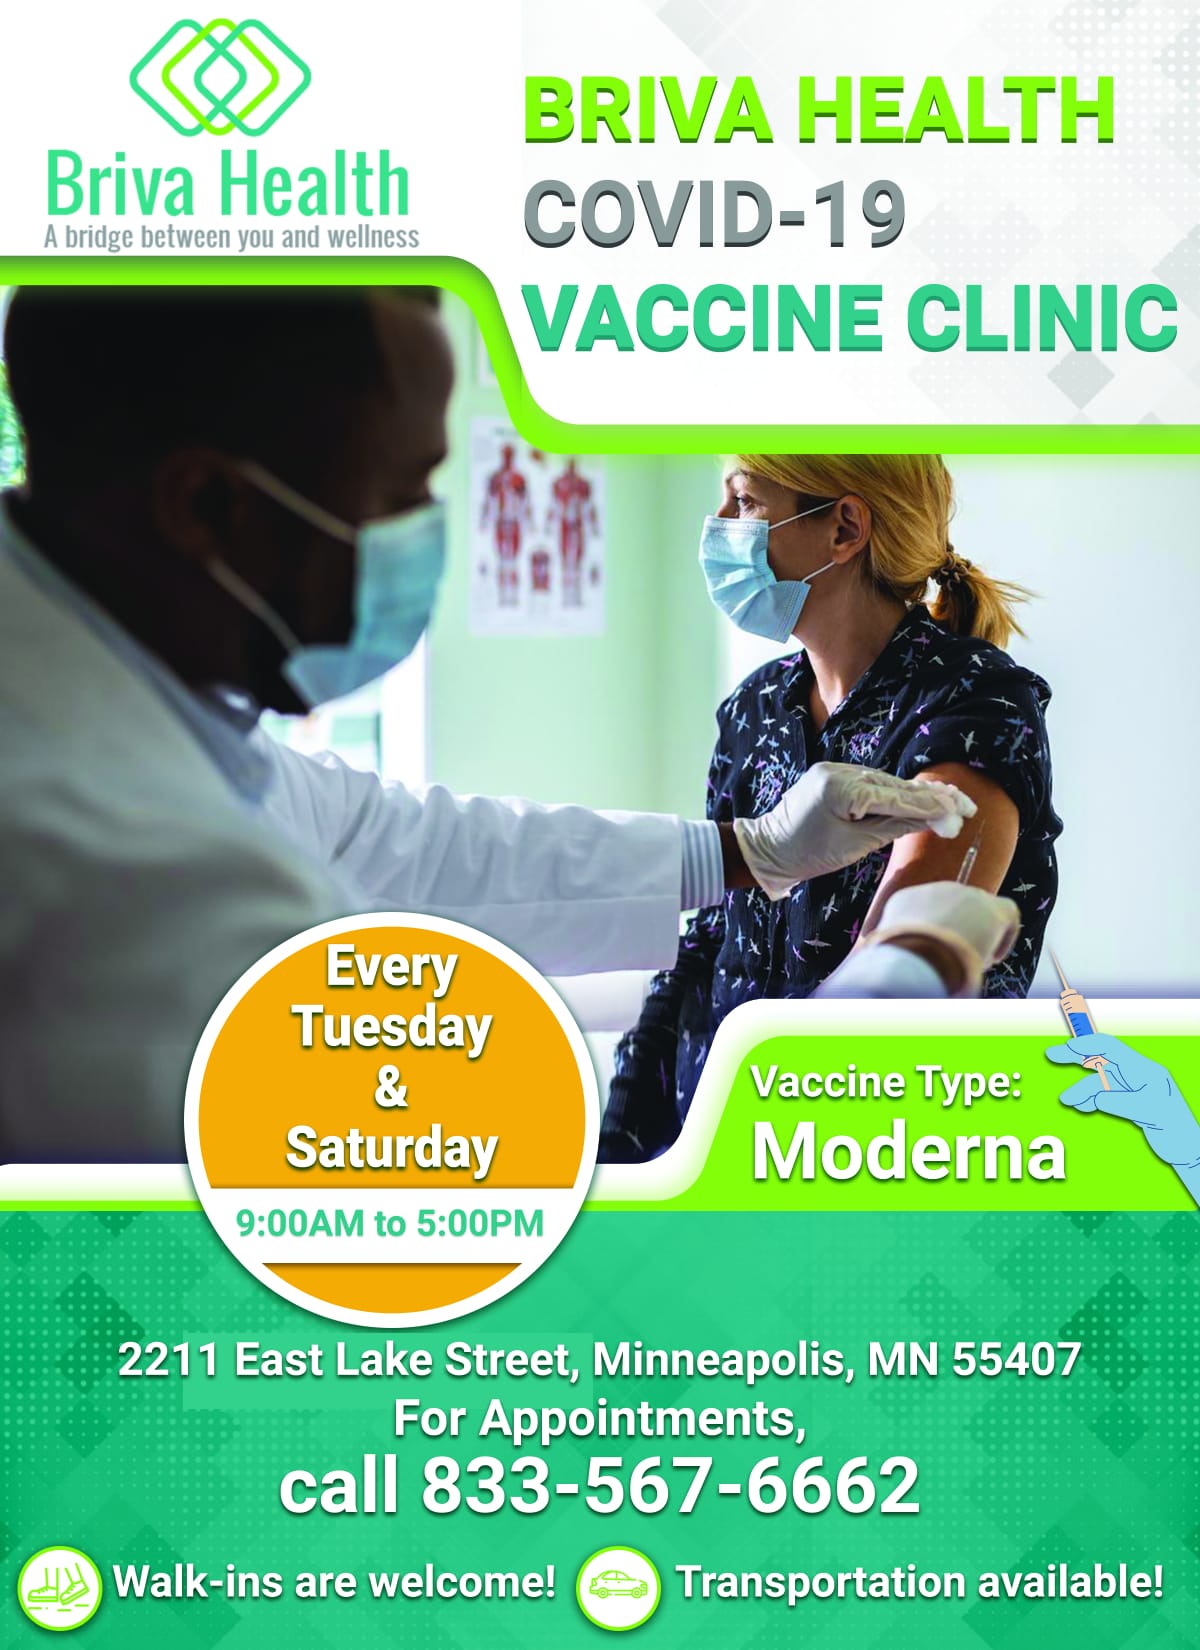 COVID-19 Vaccine Clinic and Support